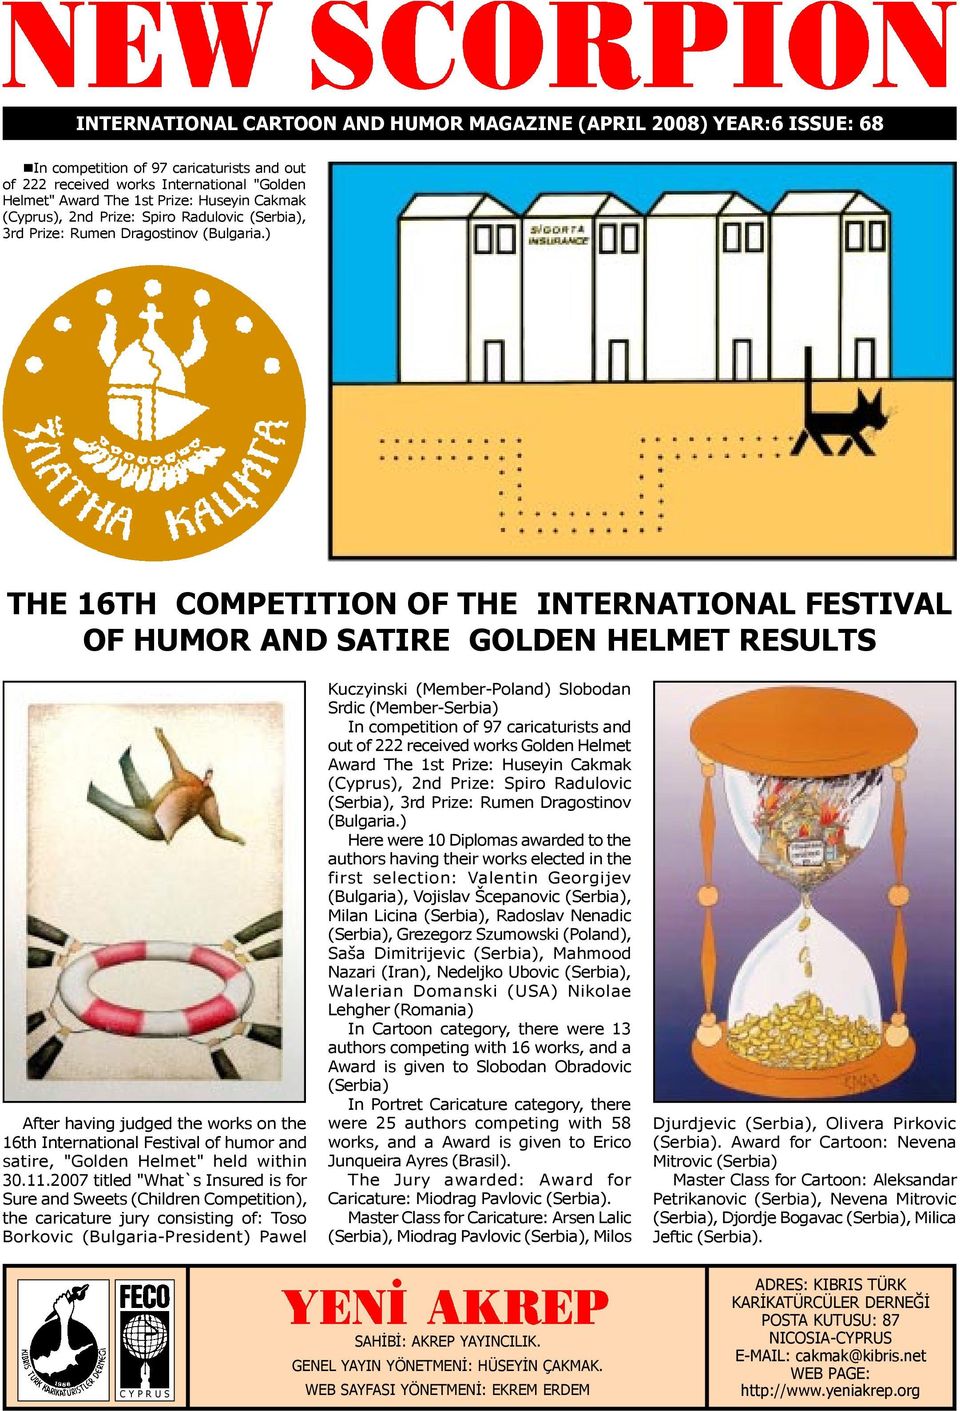 ) THE 16TH COMPETITION OF THE INTERNATIONAL FESTIVAL OF HUMOR AND SATIRE GOLDEN HELMET RESULTS After having judged the works on the 16th International Festival of humor and satire, "Golden Helmet"